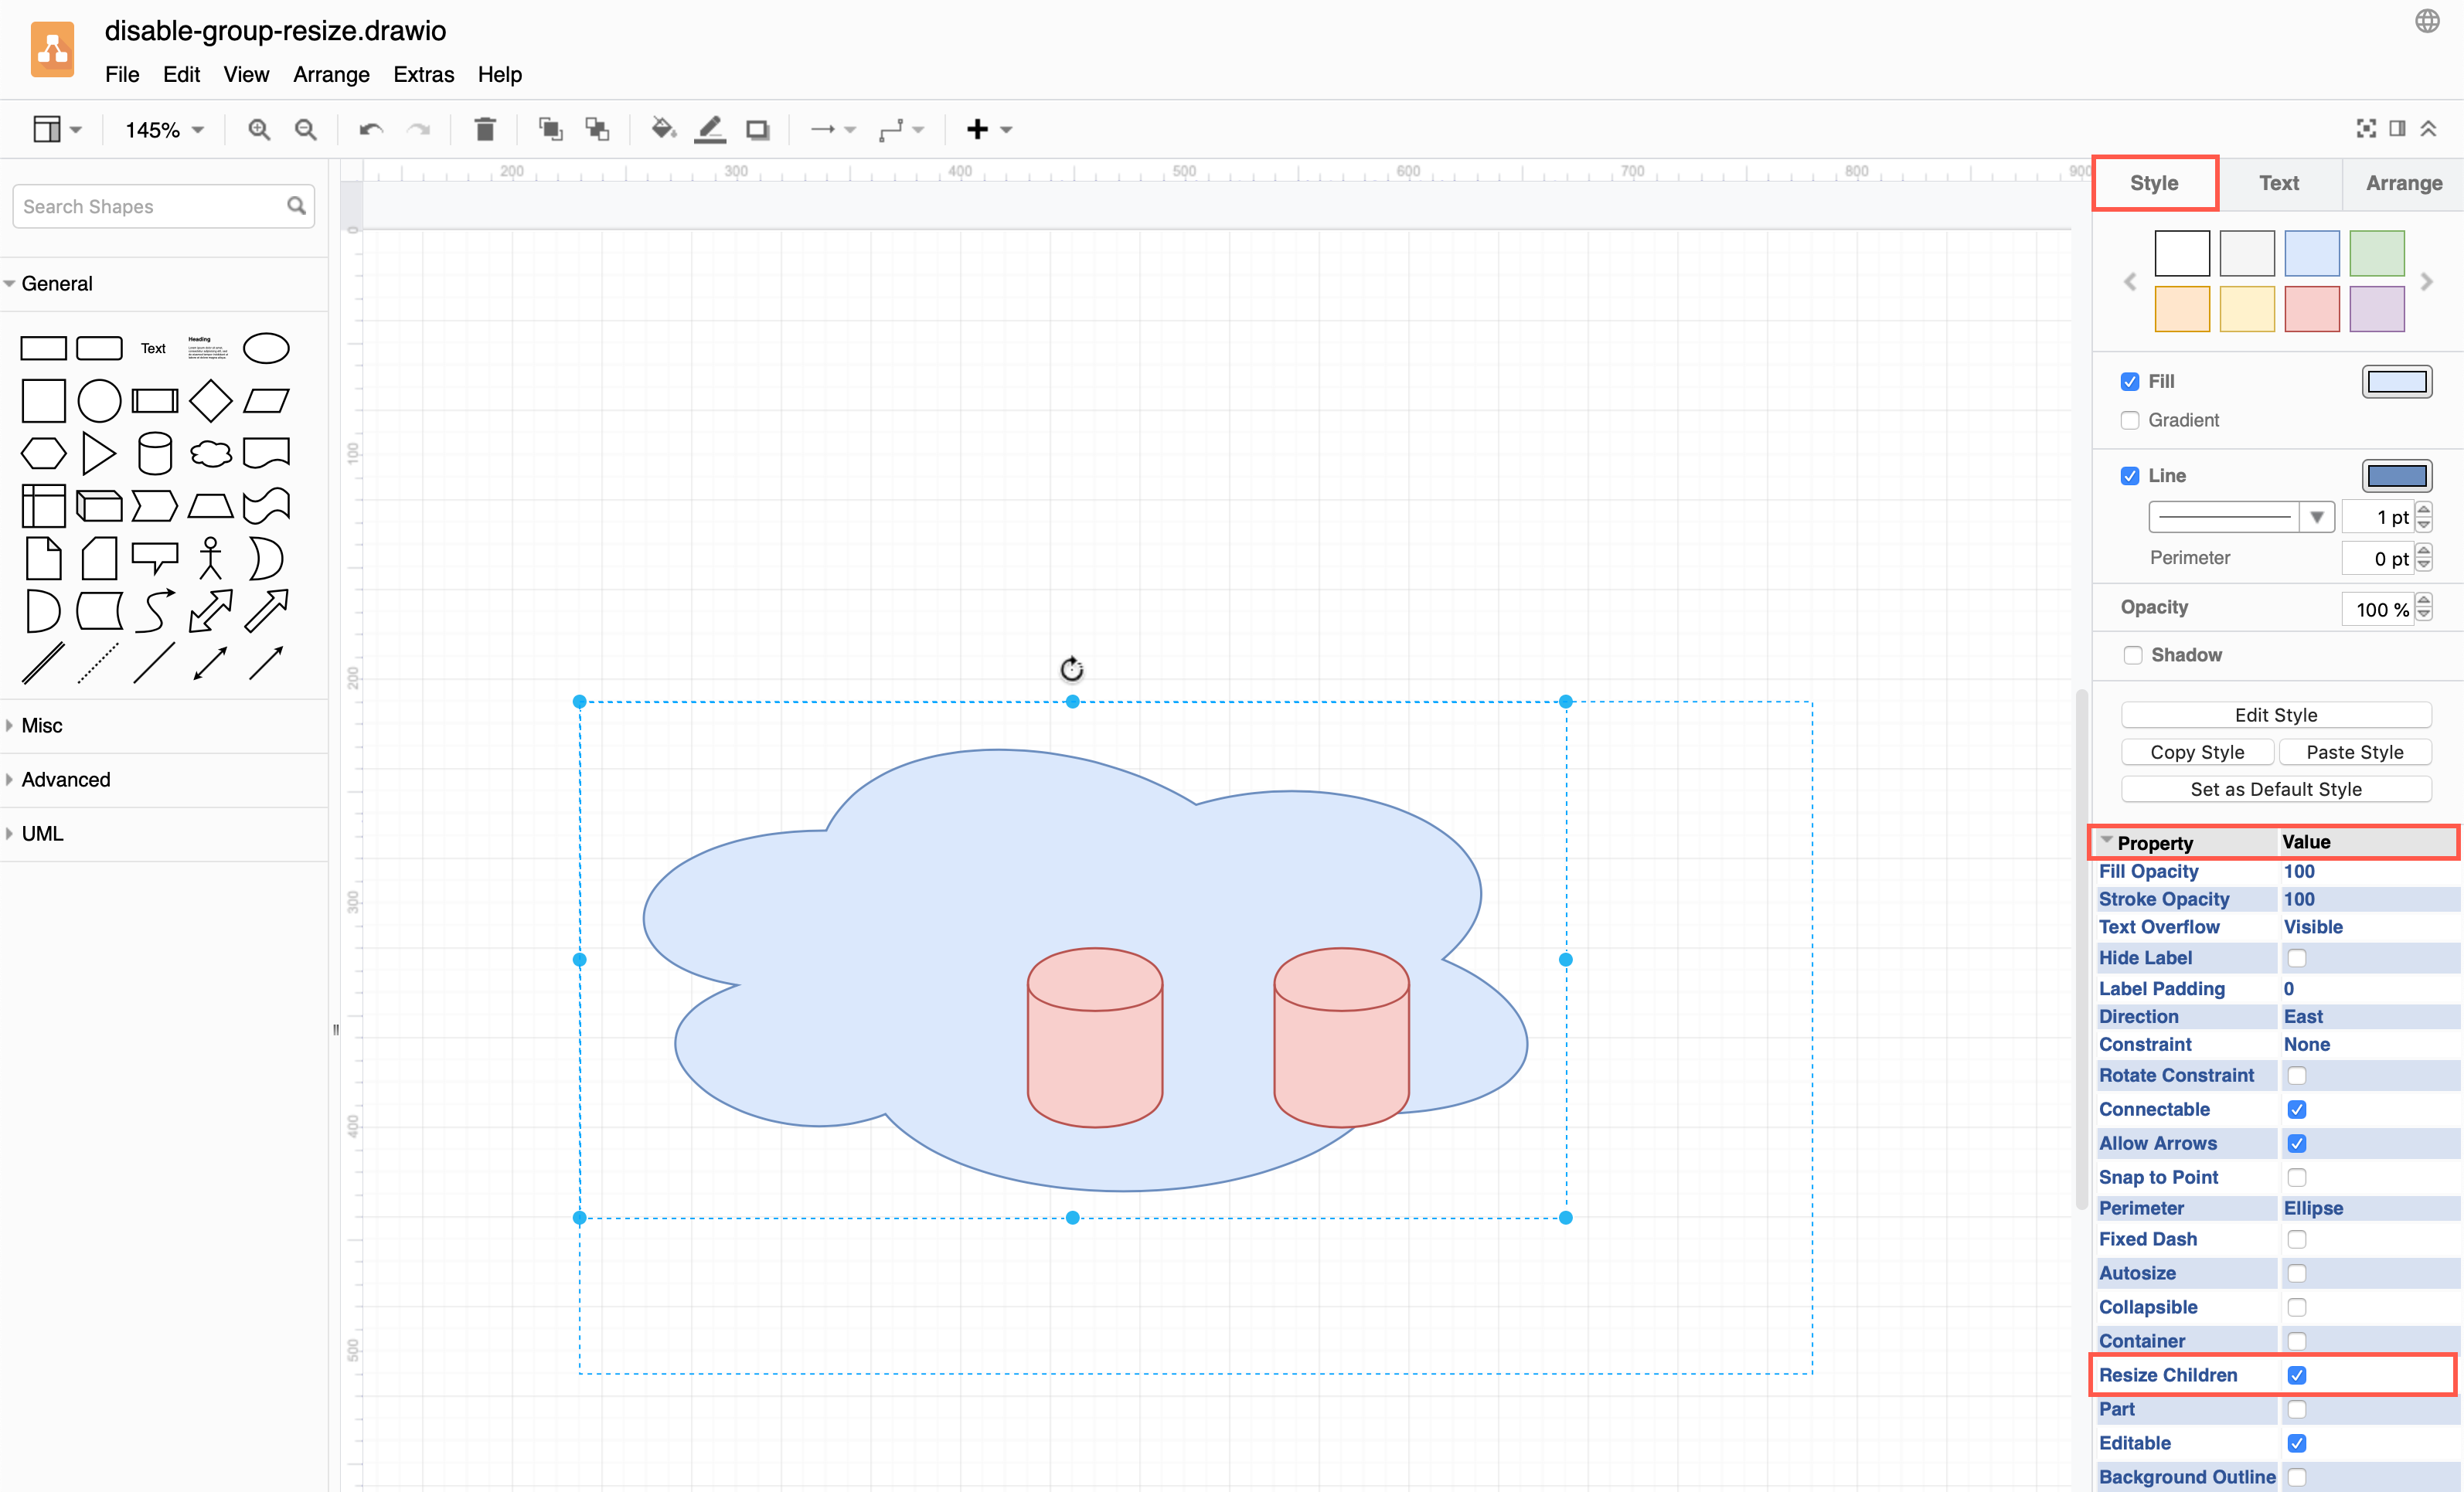 Disable Resize Children in the shape properties to resize grouped shapes individually